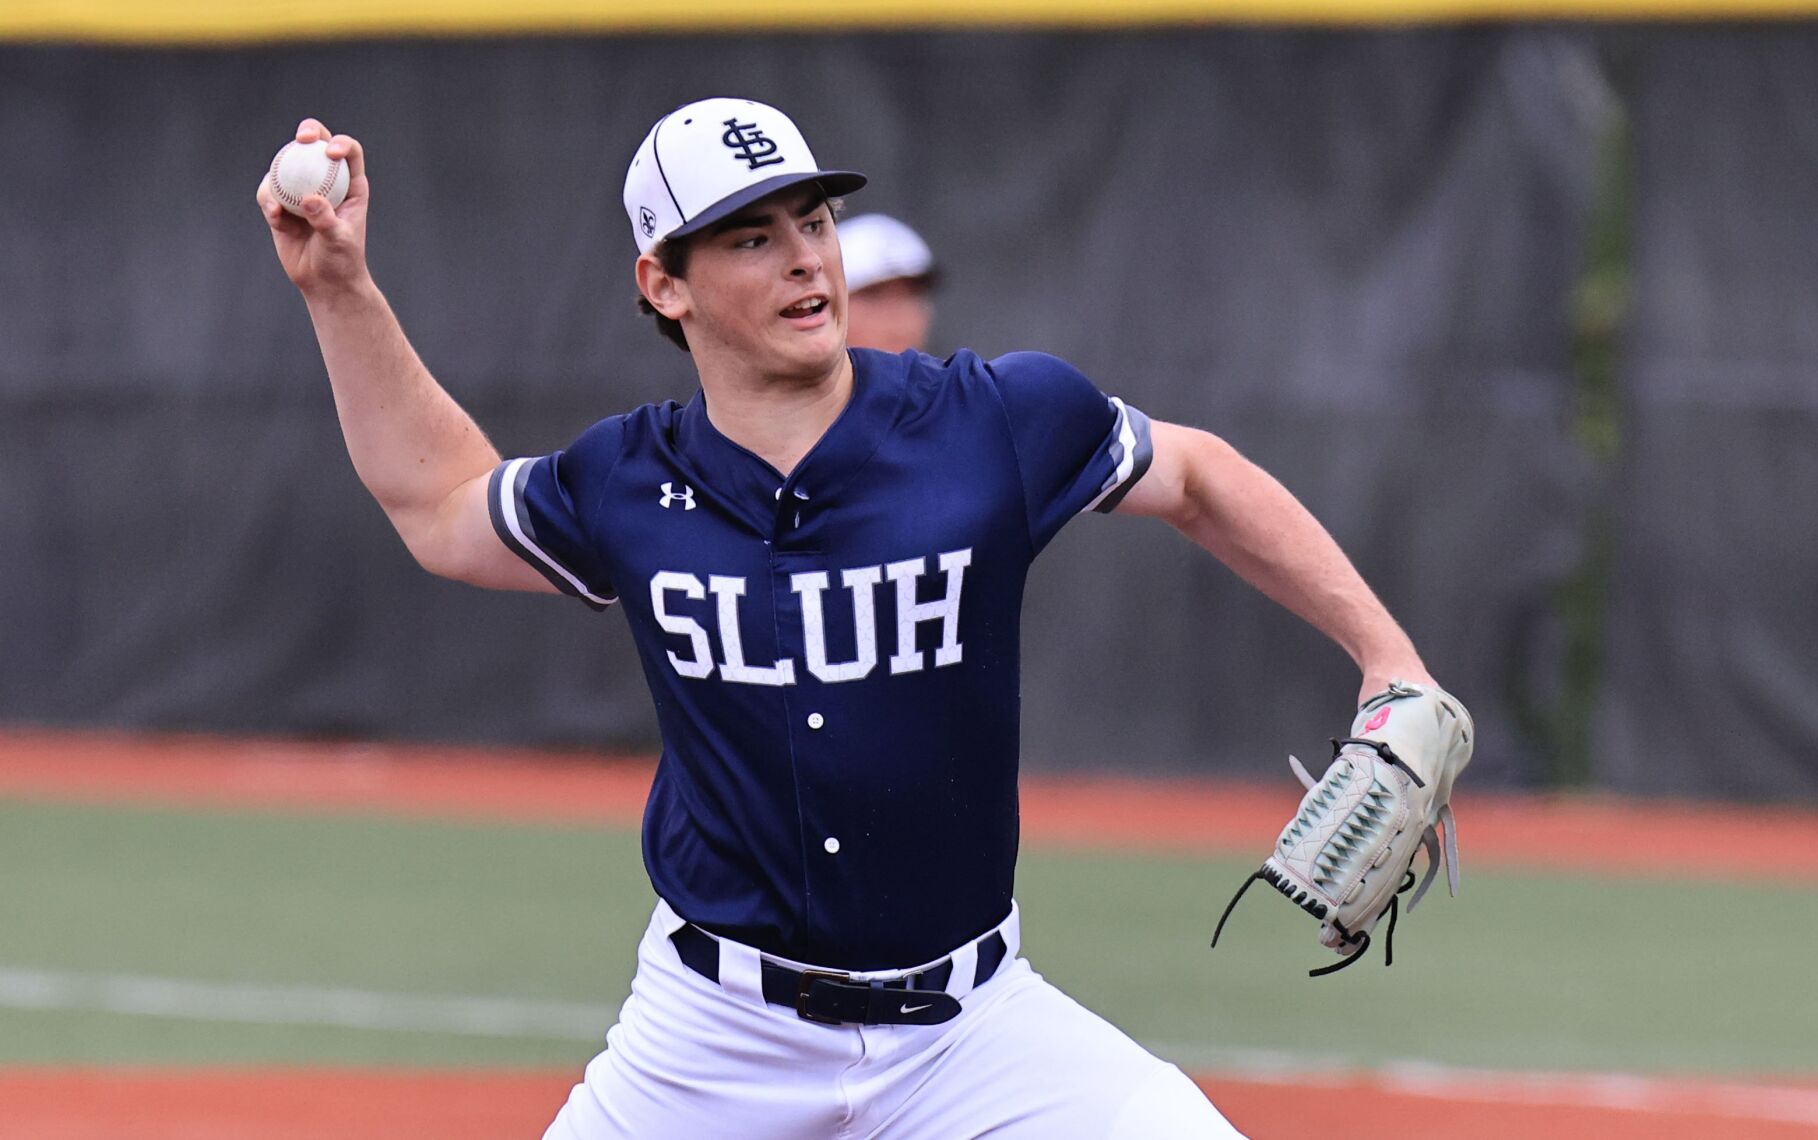 SLUH Wins Outright MCC Baseball Title with Michael Strong’s No-Hitter